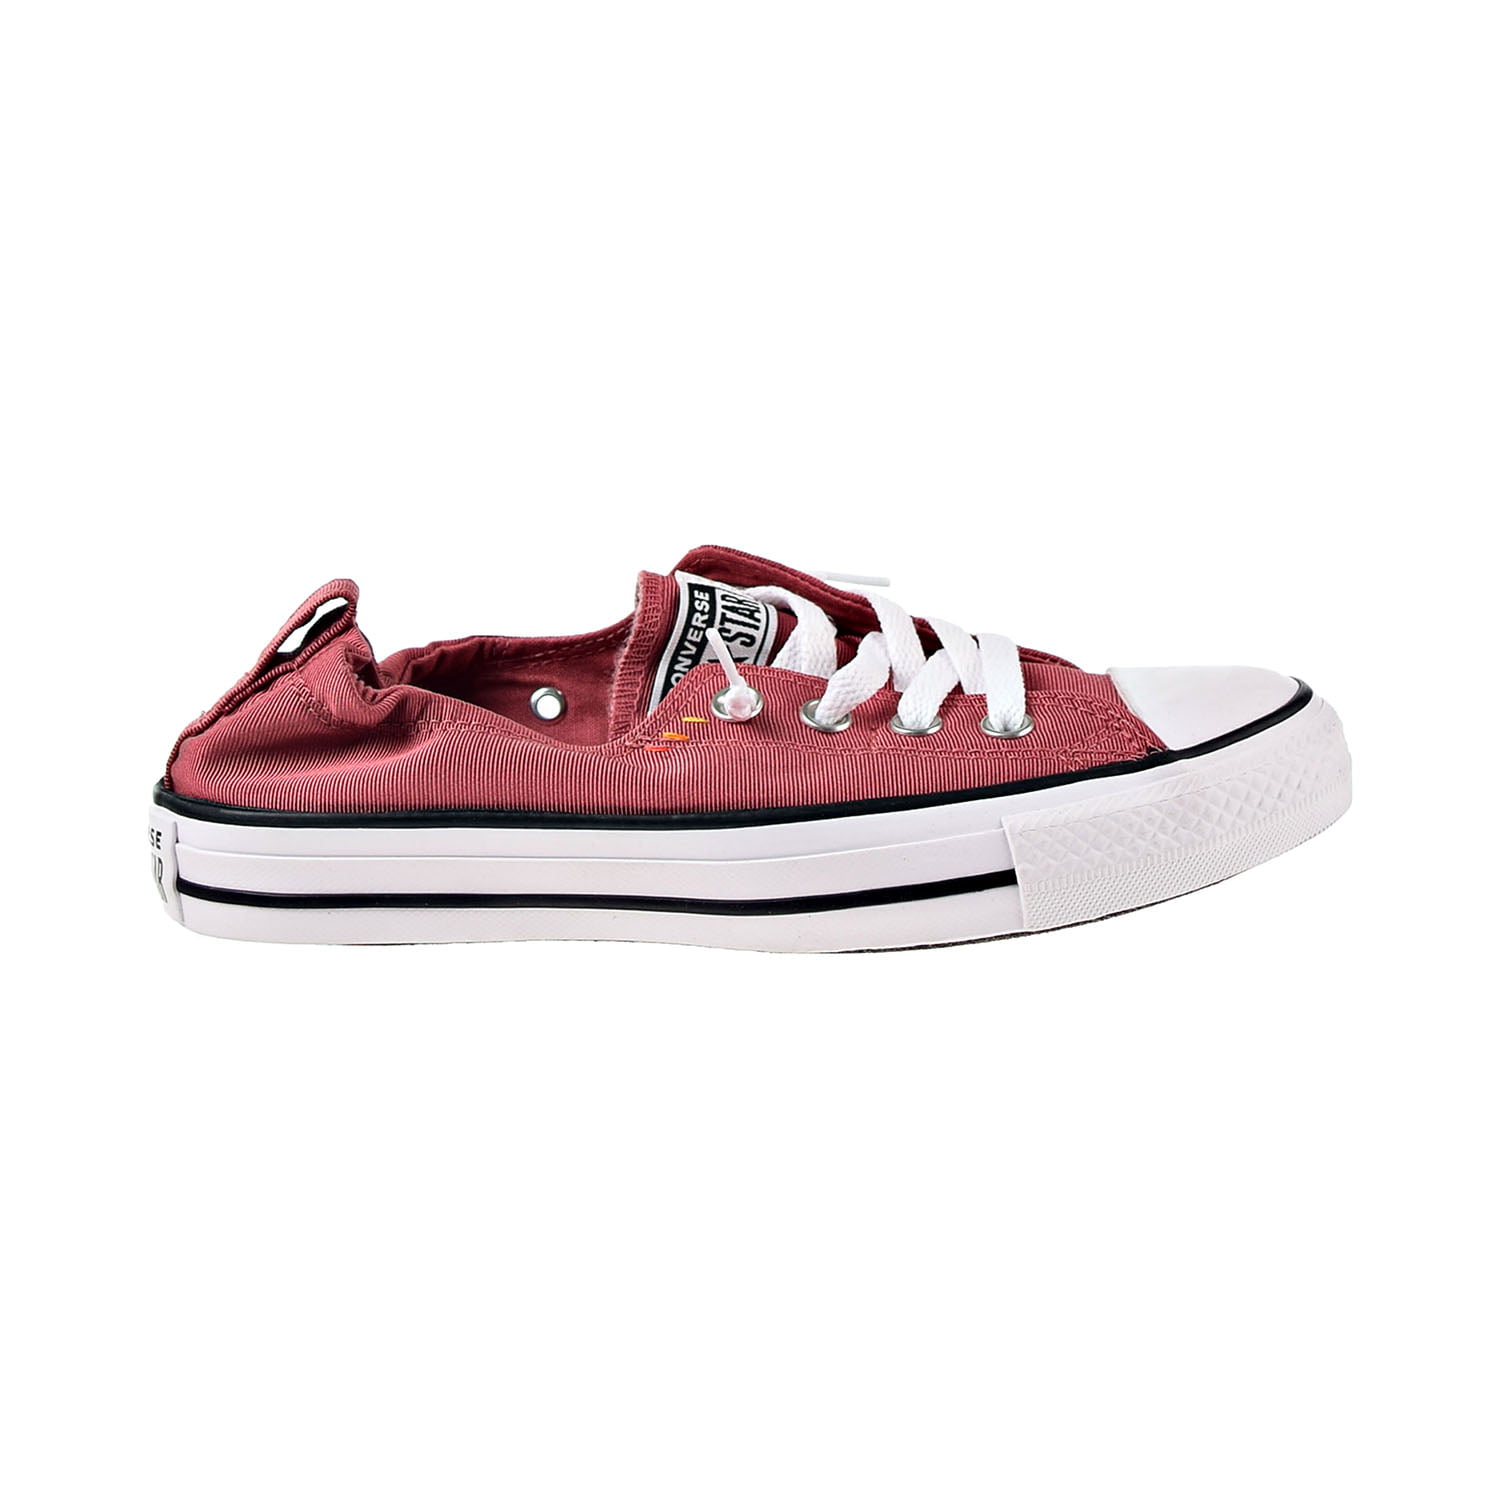 Converse Chuck Taylor All Star Shoreline Slip-On Womens Casual Shoes  Red-White 565242f 